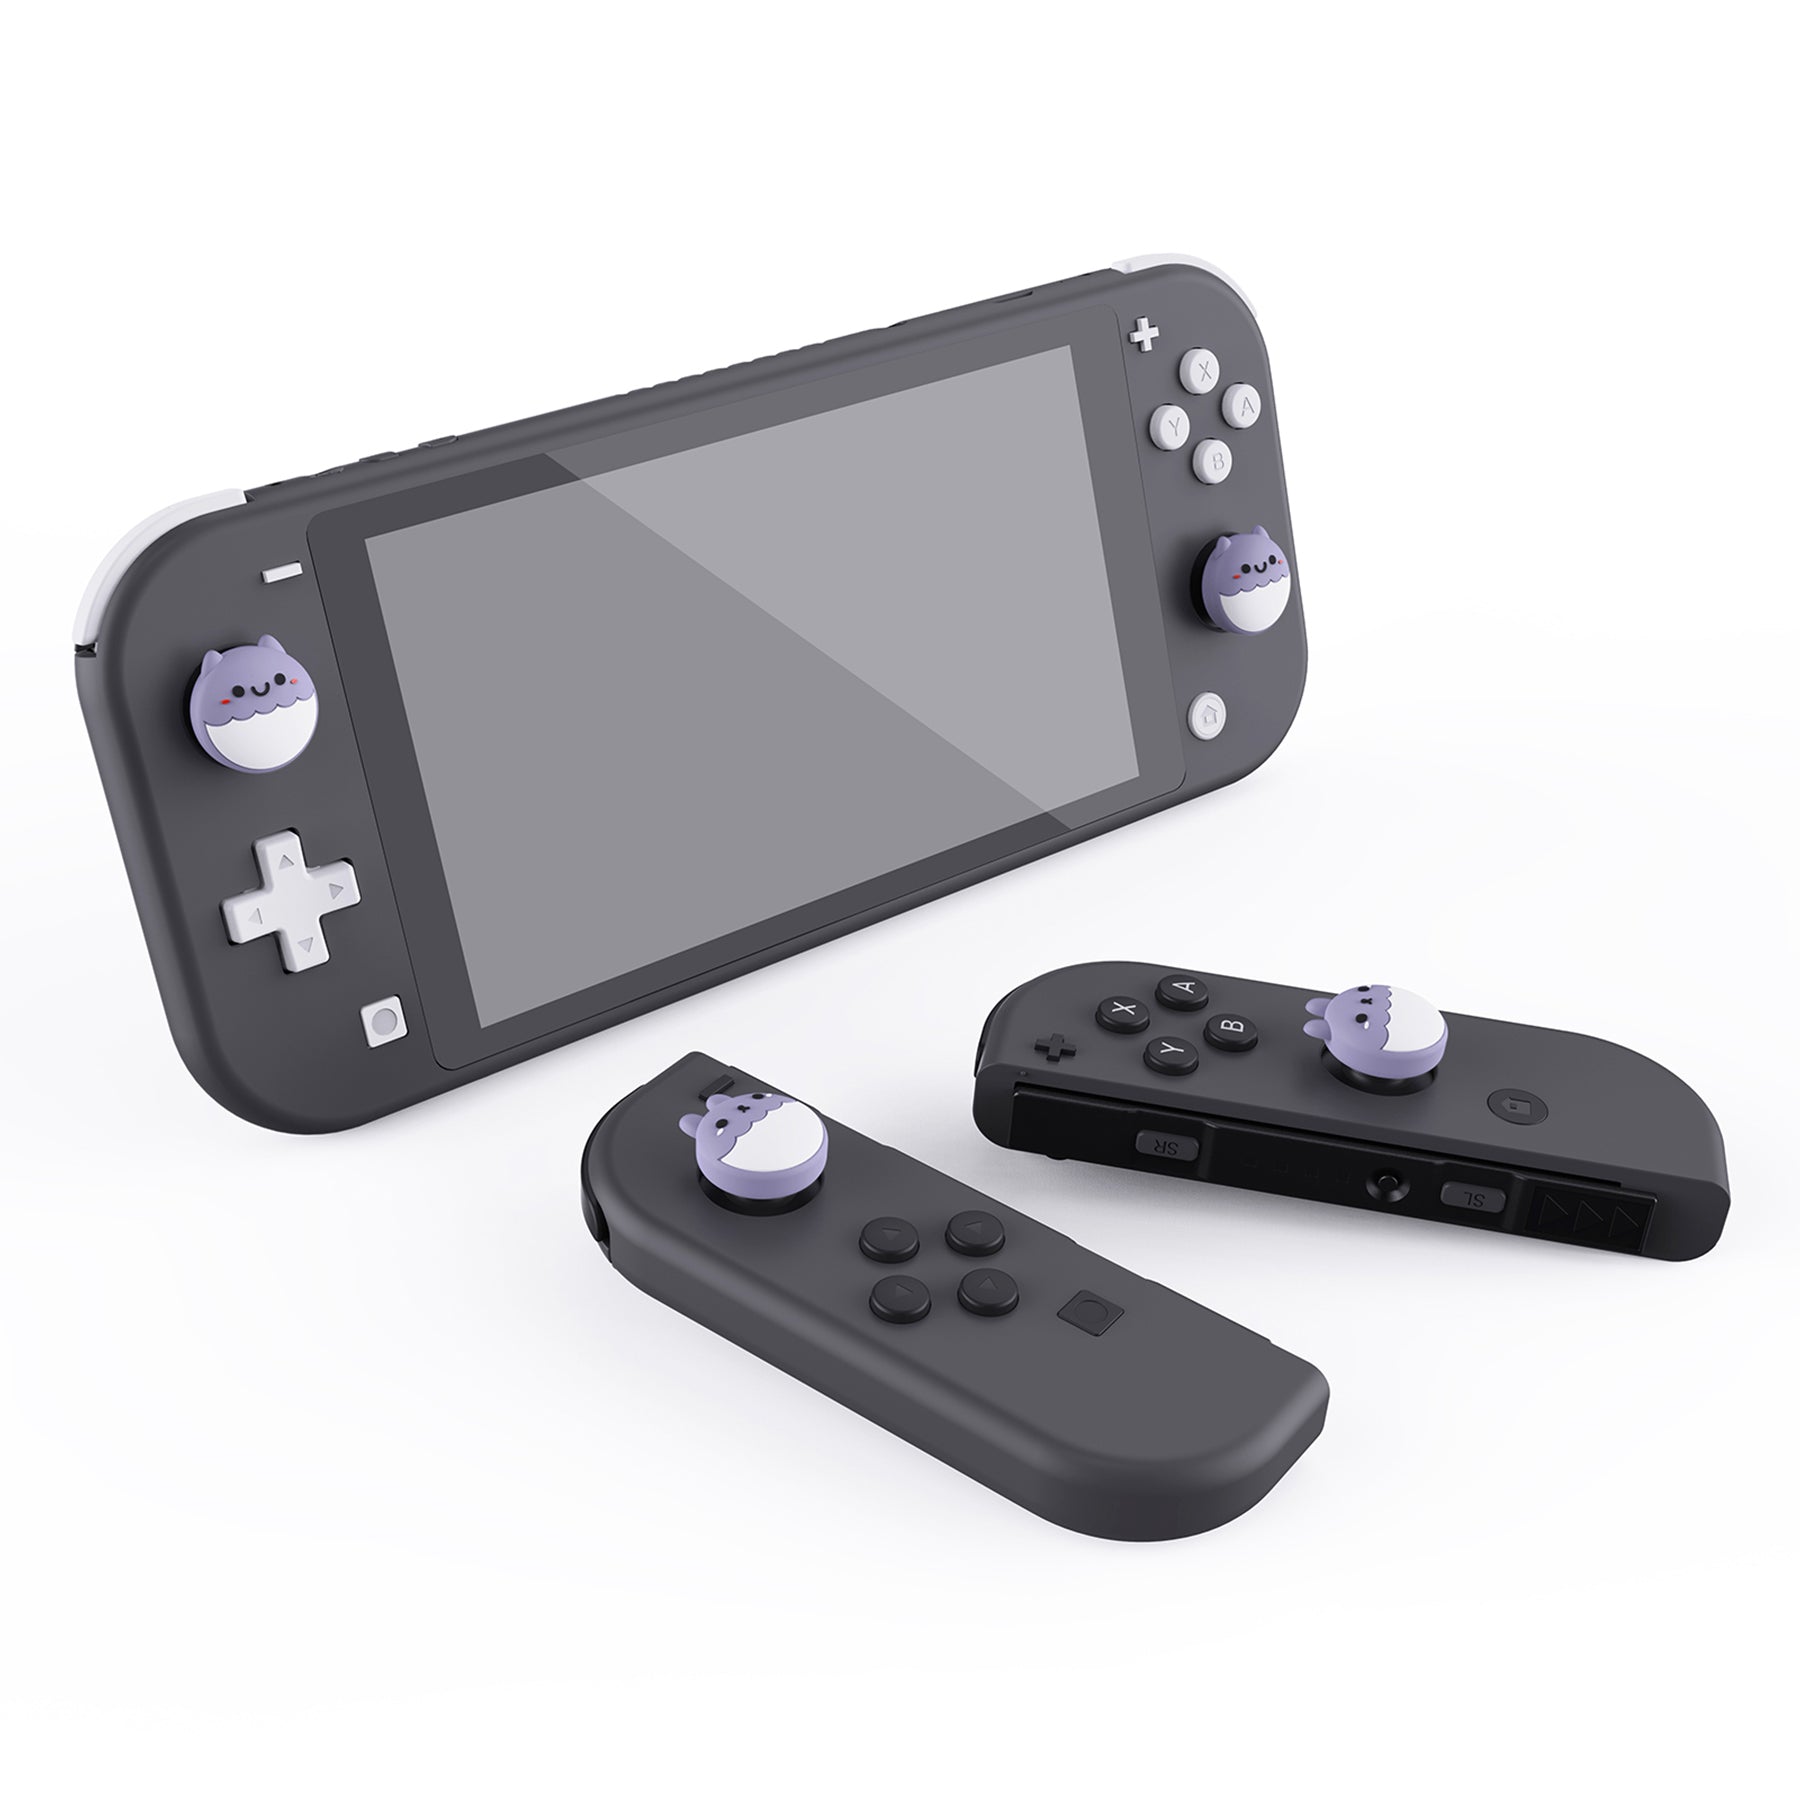 PlayVital Rabbit & Squirrel Cute Thumb Grip Caps for Nintendo Switch, Joystick Caps for Nintendo Switch Lite, Analog Cover Thumbstick Grips for OLED Joycon - Light Violet - NJM1120 playvital